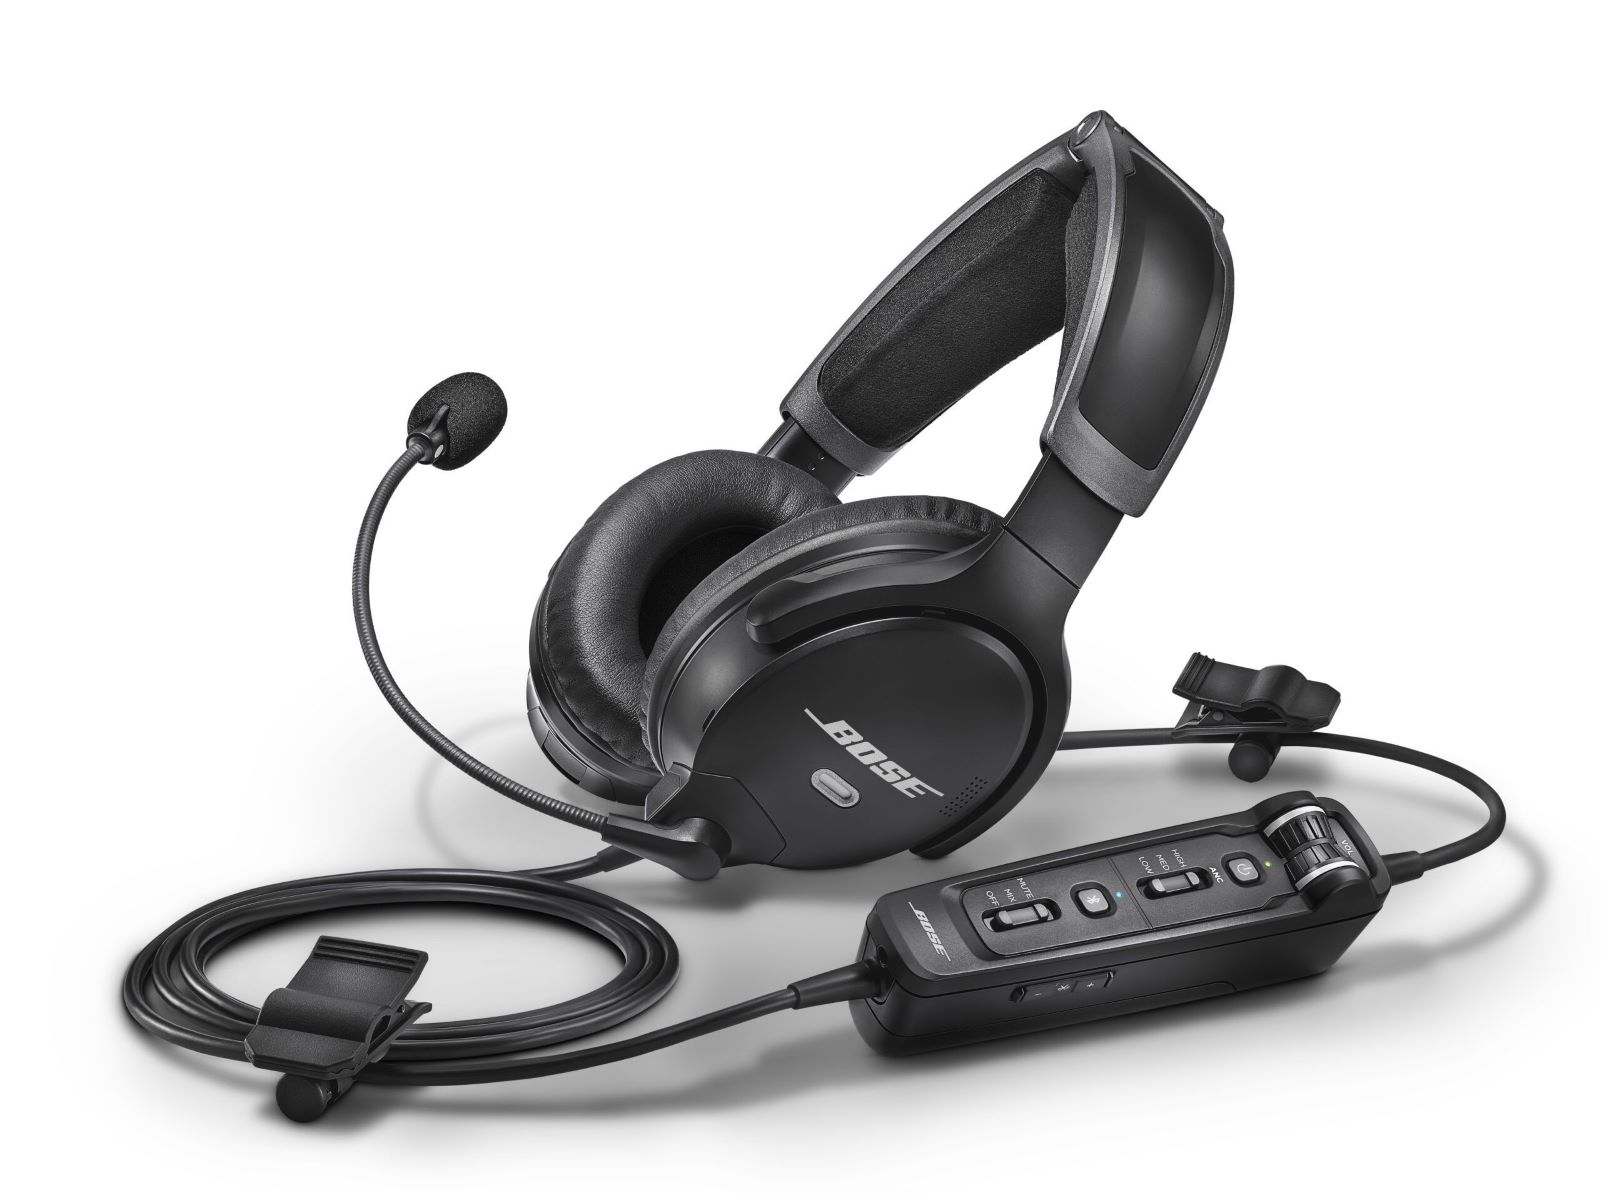 Quick Reset: Troubleshooting Your Bose Headset